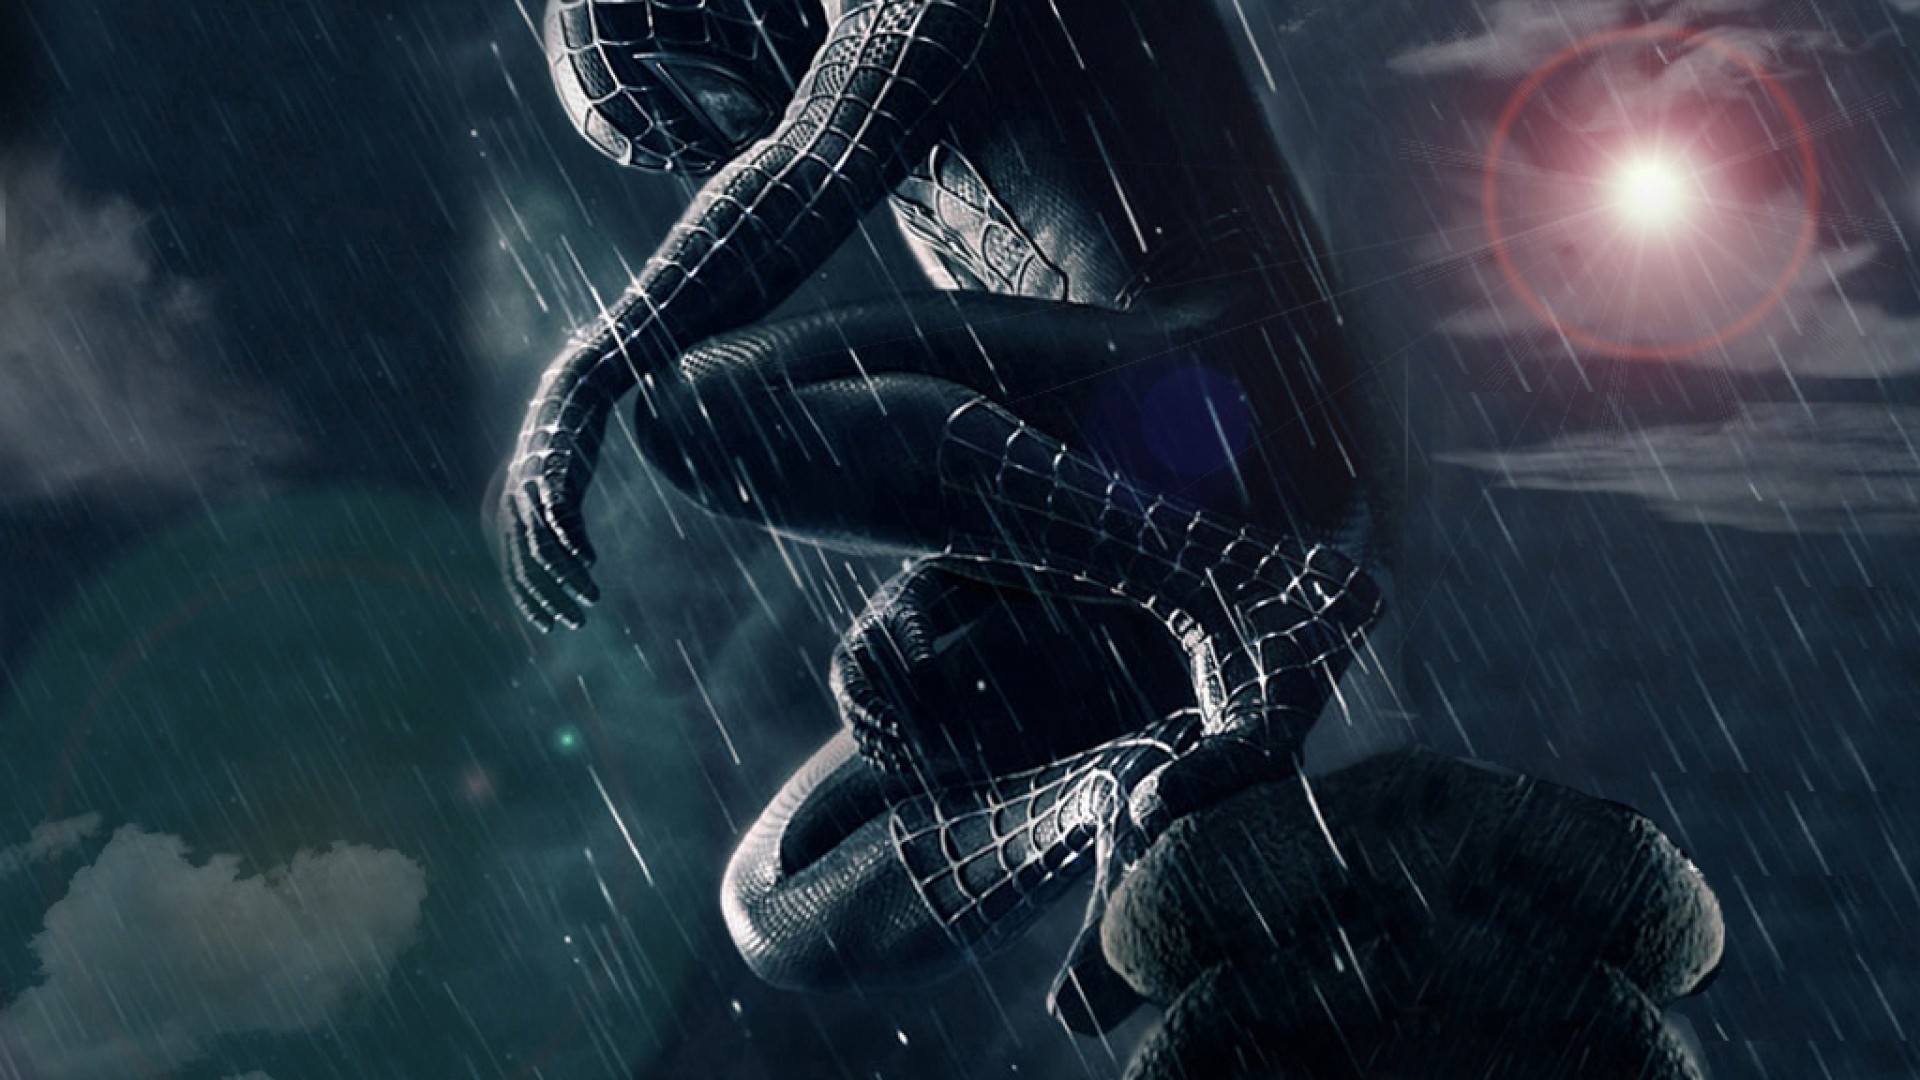 Spiderman Wallpaper 1080p Spiderman Photos with 23489wall